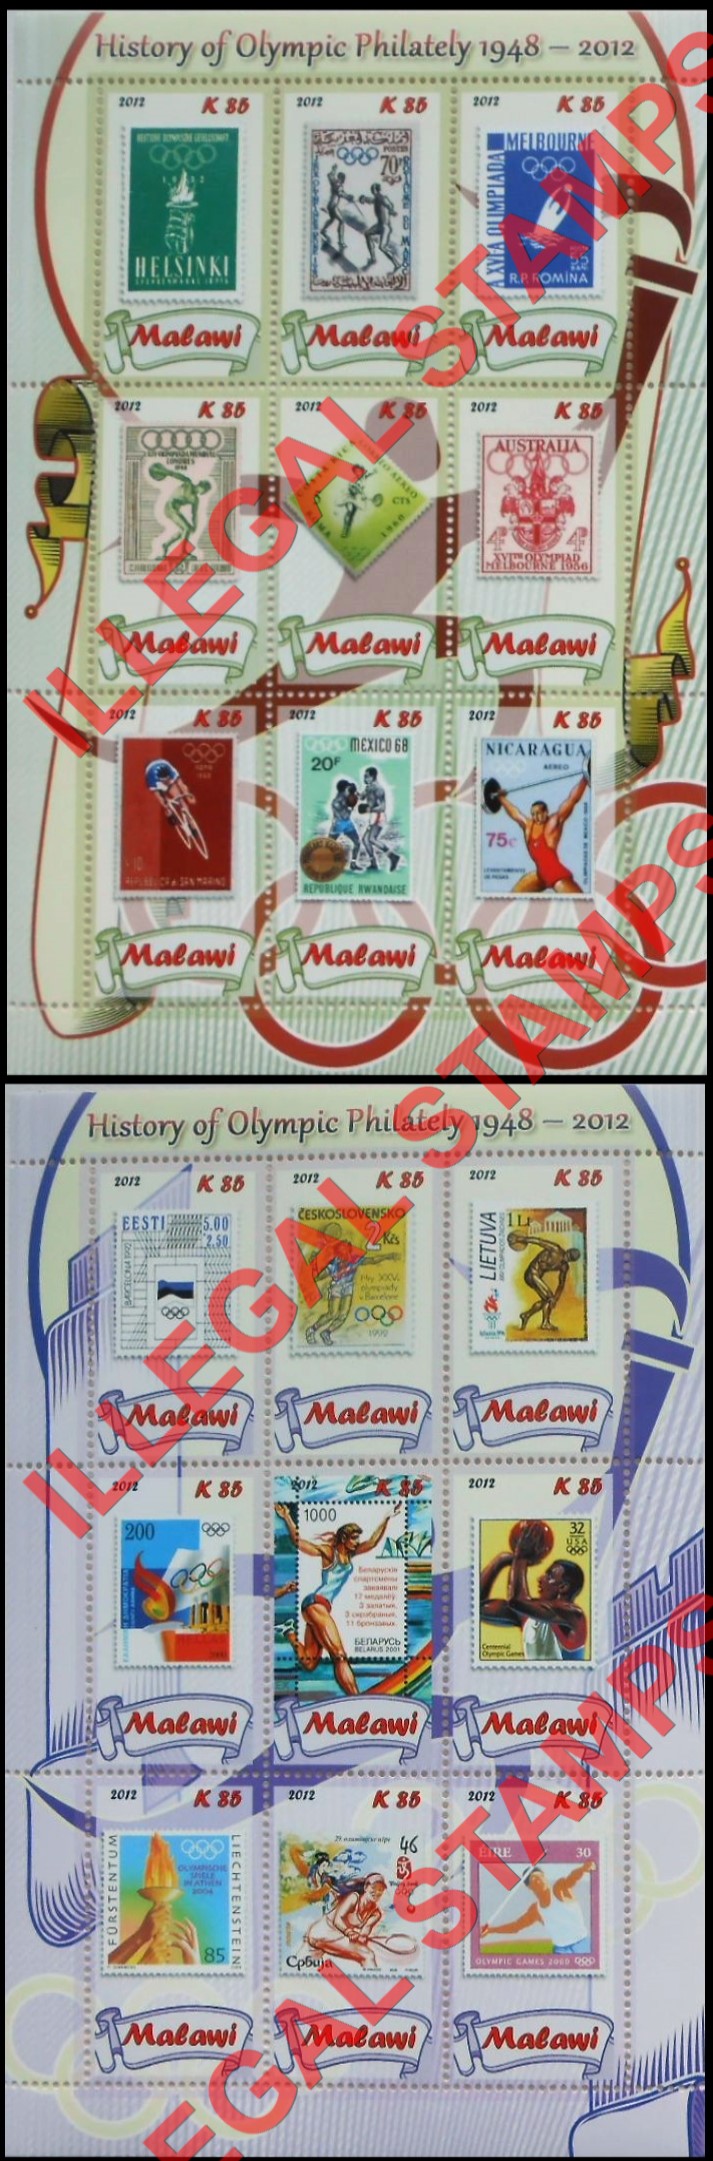 Malawi 2012 History of Olympic Philately Illegal Stamp Sheetlets of 9 (Part 4)